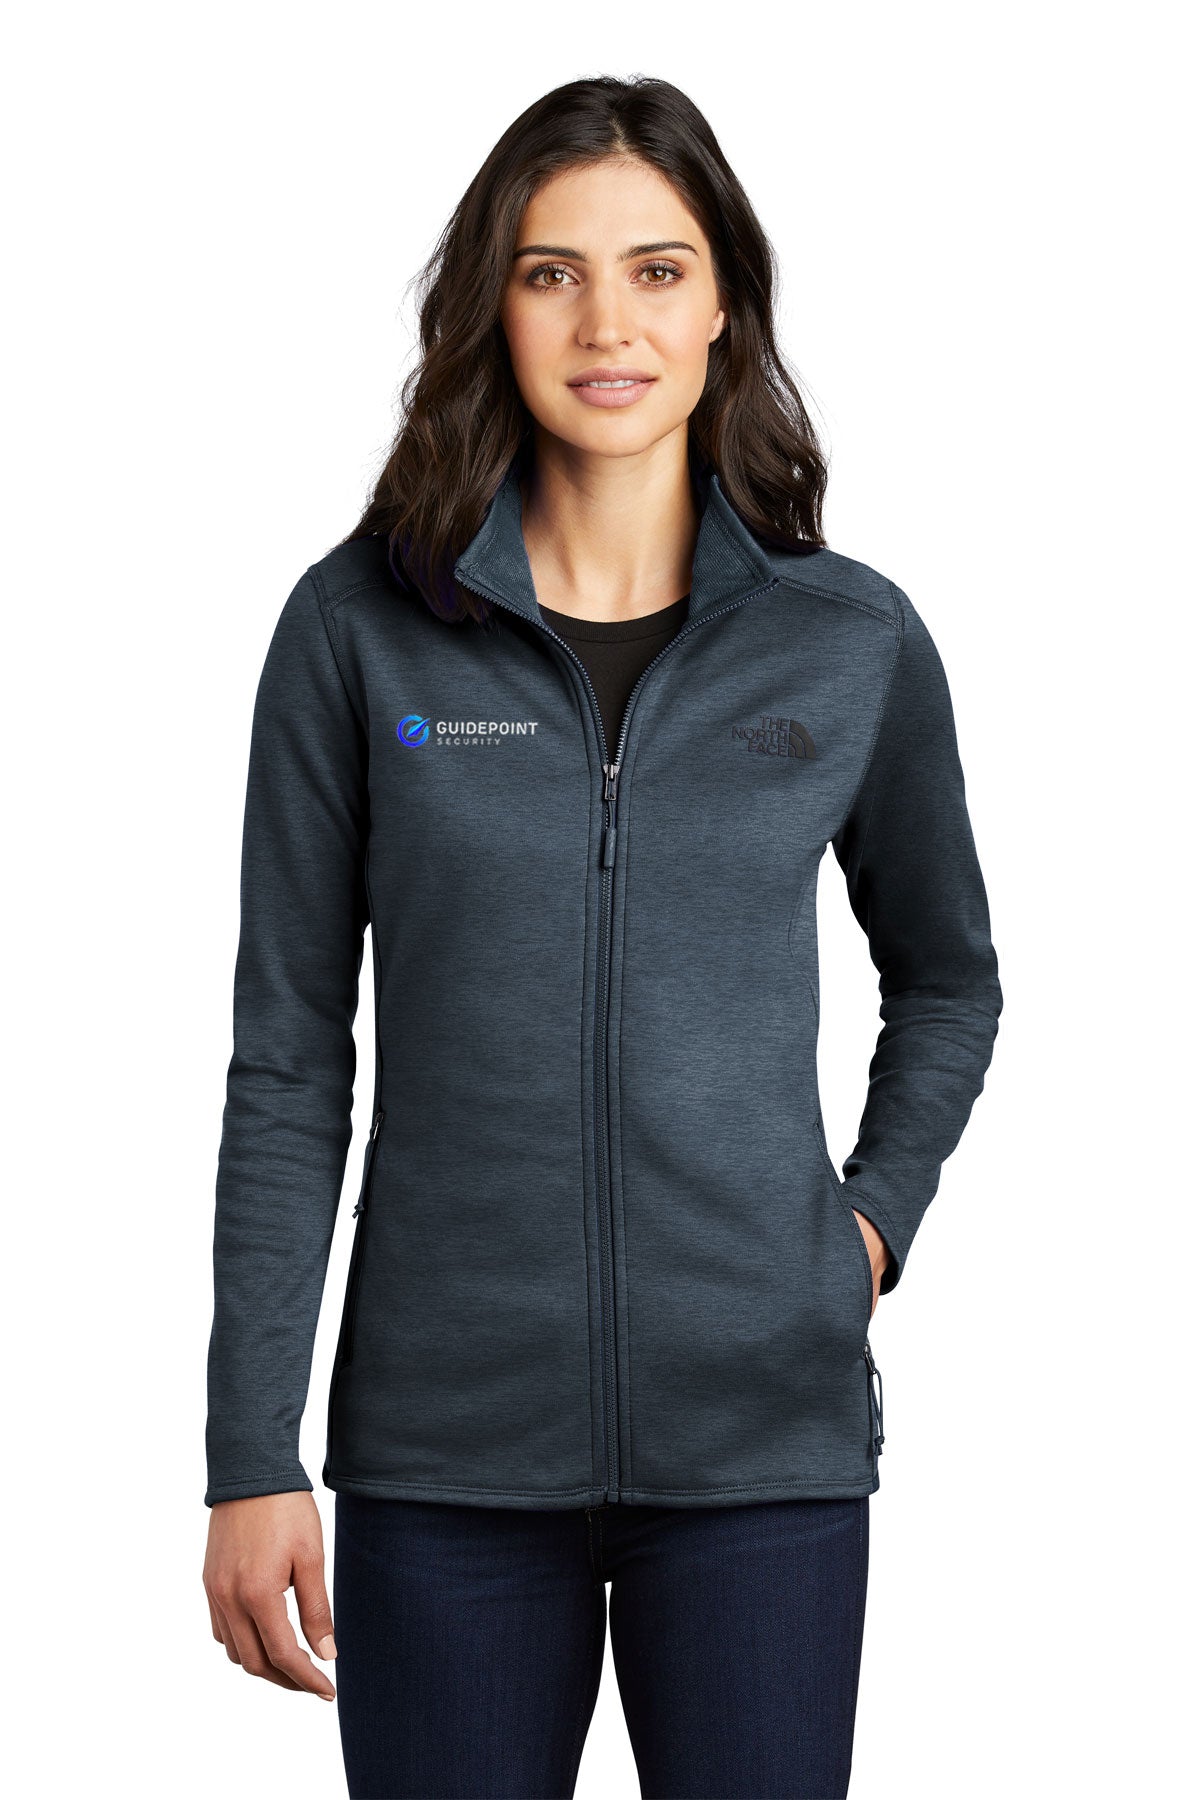 North Face Skyline Ladies Fleece Jacket, Urban Navy Heather [GuidePoint Security]